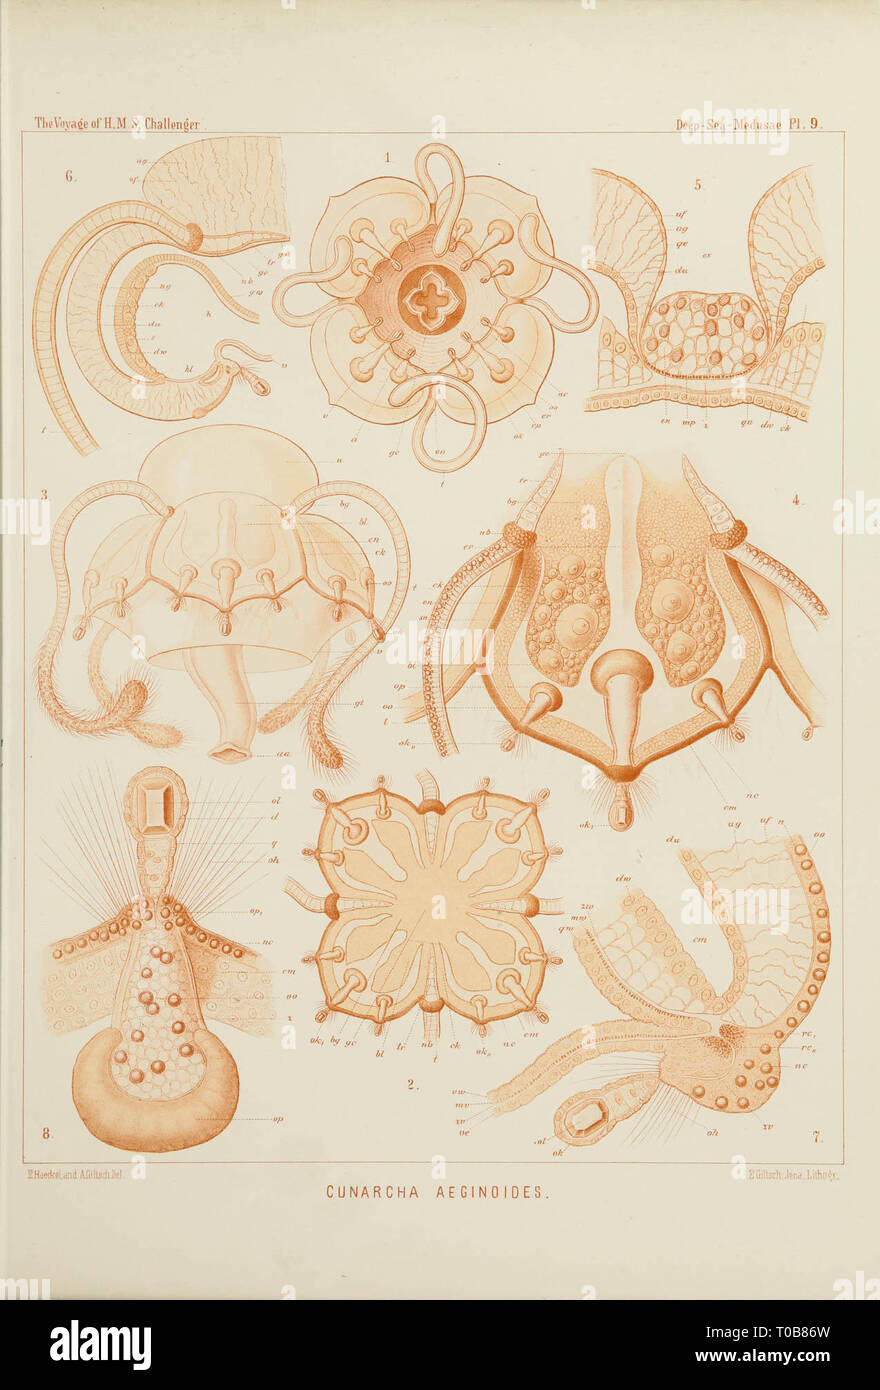 From Report on Deepsea Medusae dredged by Challenger during the Years Challenger Expedition reports Ernst Haeckel PDChallenger Report Uploaded with Report on the DeepSea Medusae Ptychogastria polaris Stock Photo